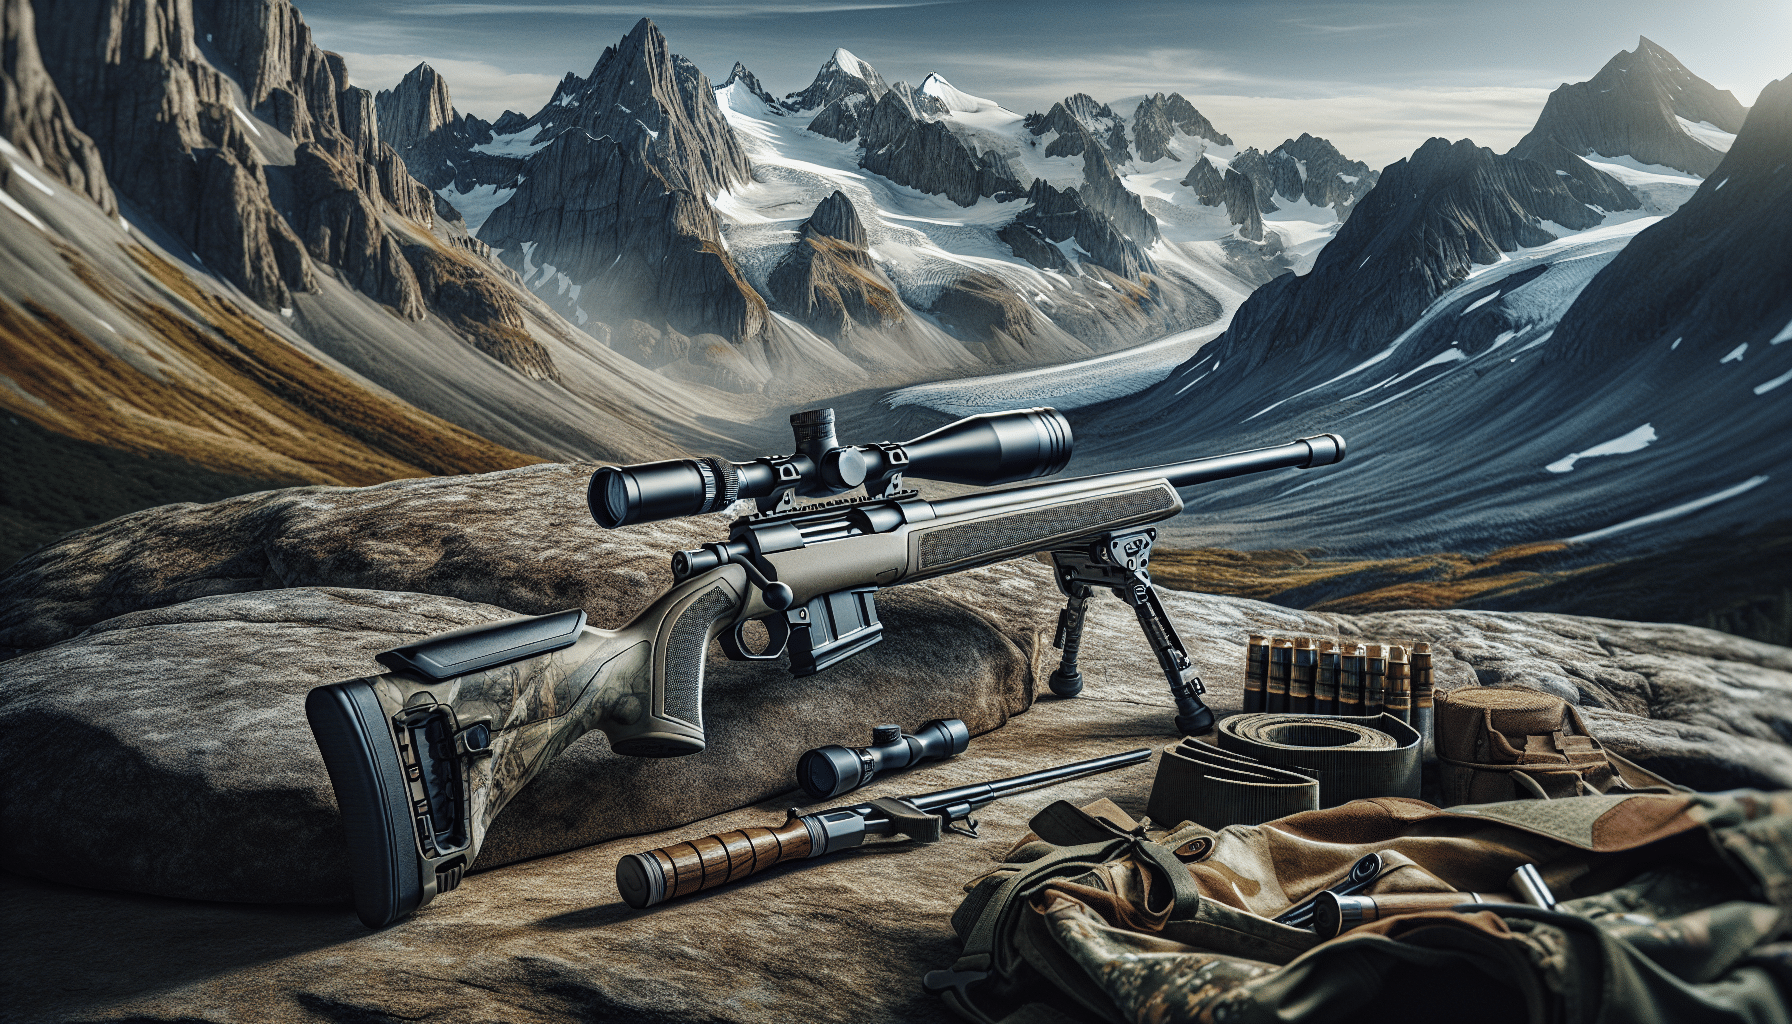 An image highlighting the distinctive features that make a good hunting rifle suitable for mountainous terrain. The landscape should be rugged and rocky, with steep slopes and snow-capped peaks in the background. The hunting rifle should be front and center on a natural rocky platform, devoid of any brand names or logos. It should have a matte finish to avoid reflection, a sturdy and durable construction to withstand the challenging environment, a lightweight design for easy mobilization, and a robust scope for accurate aim on long ranges. Besides the rifle, please incorporate some other relevant equipment like a camouflage cover and a sling strap, but without featuring people or any text in the image.